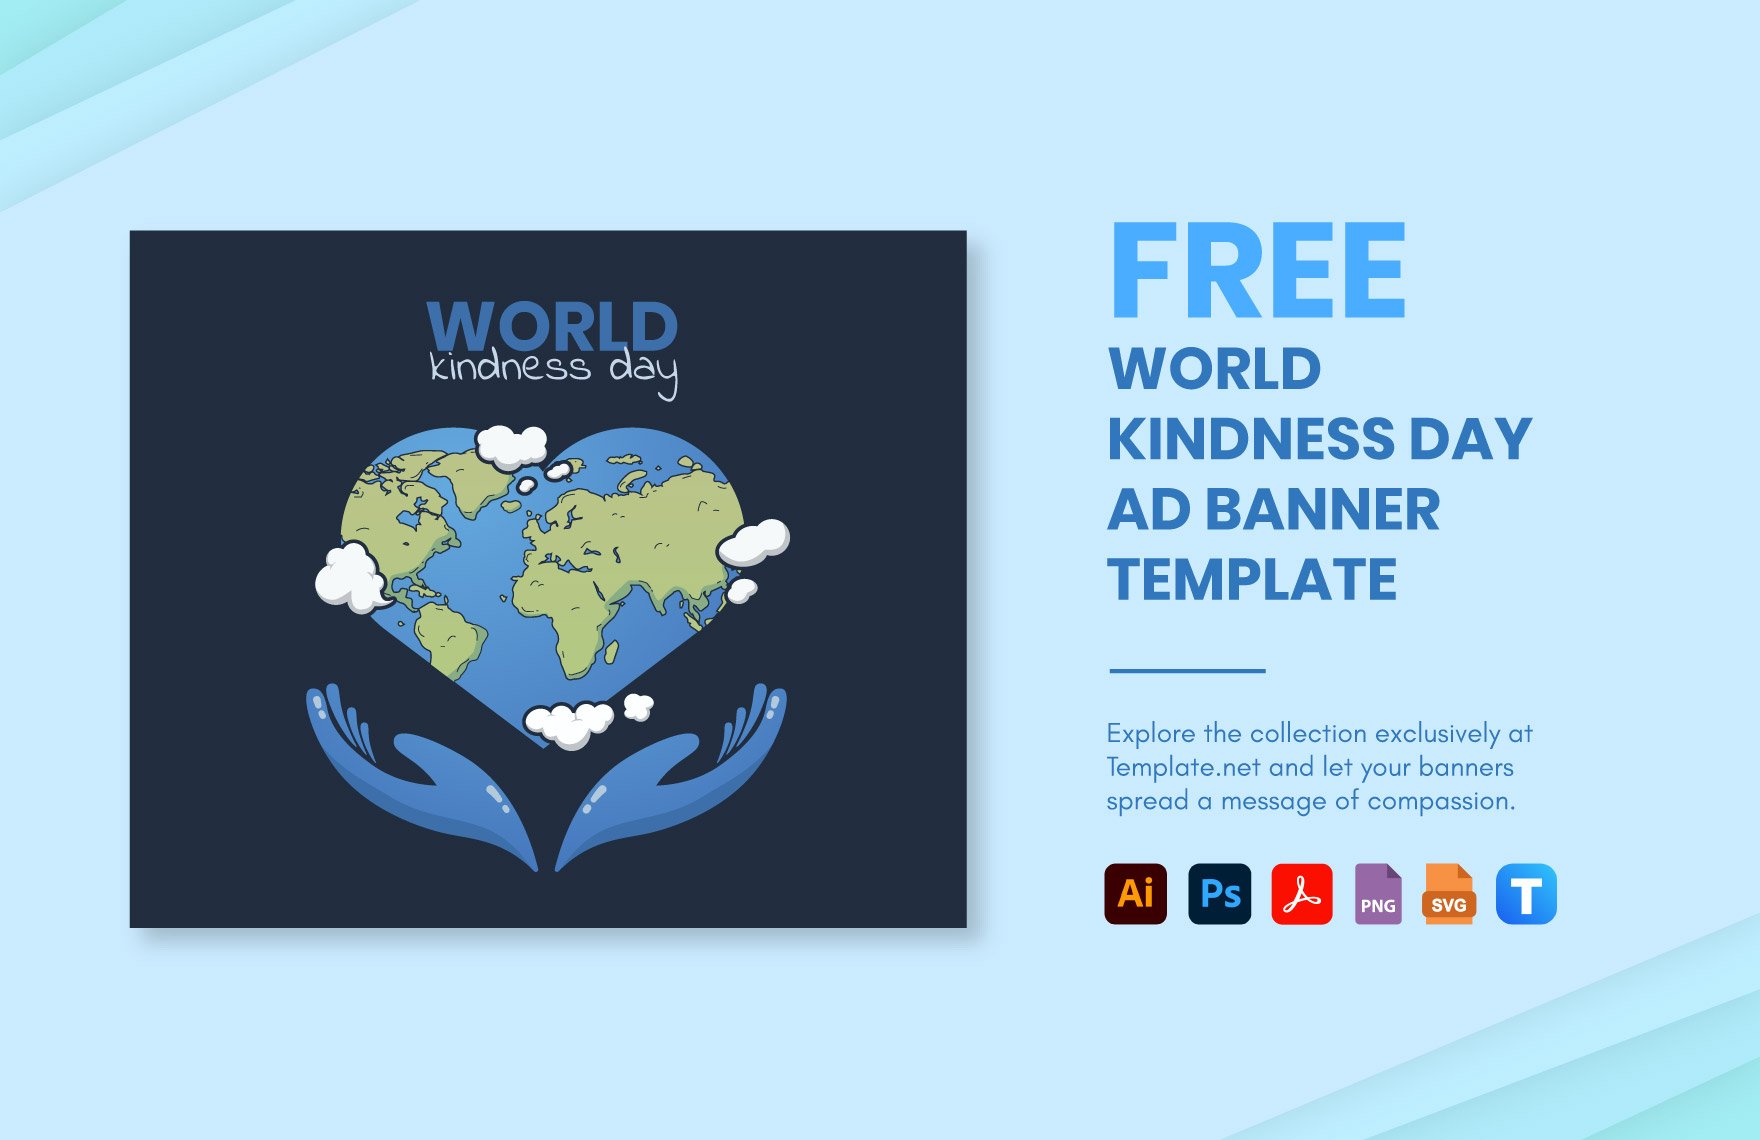 Free World Kindness Day Ad Banner Template in PDF, Illustrator, PSD, SVG, PNG